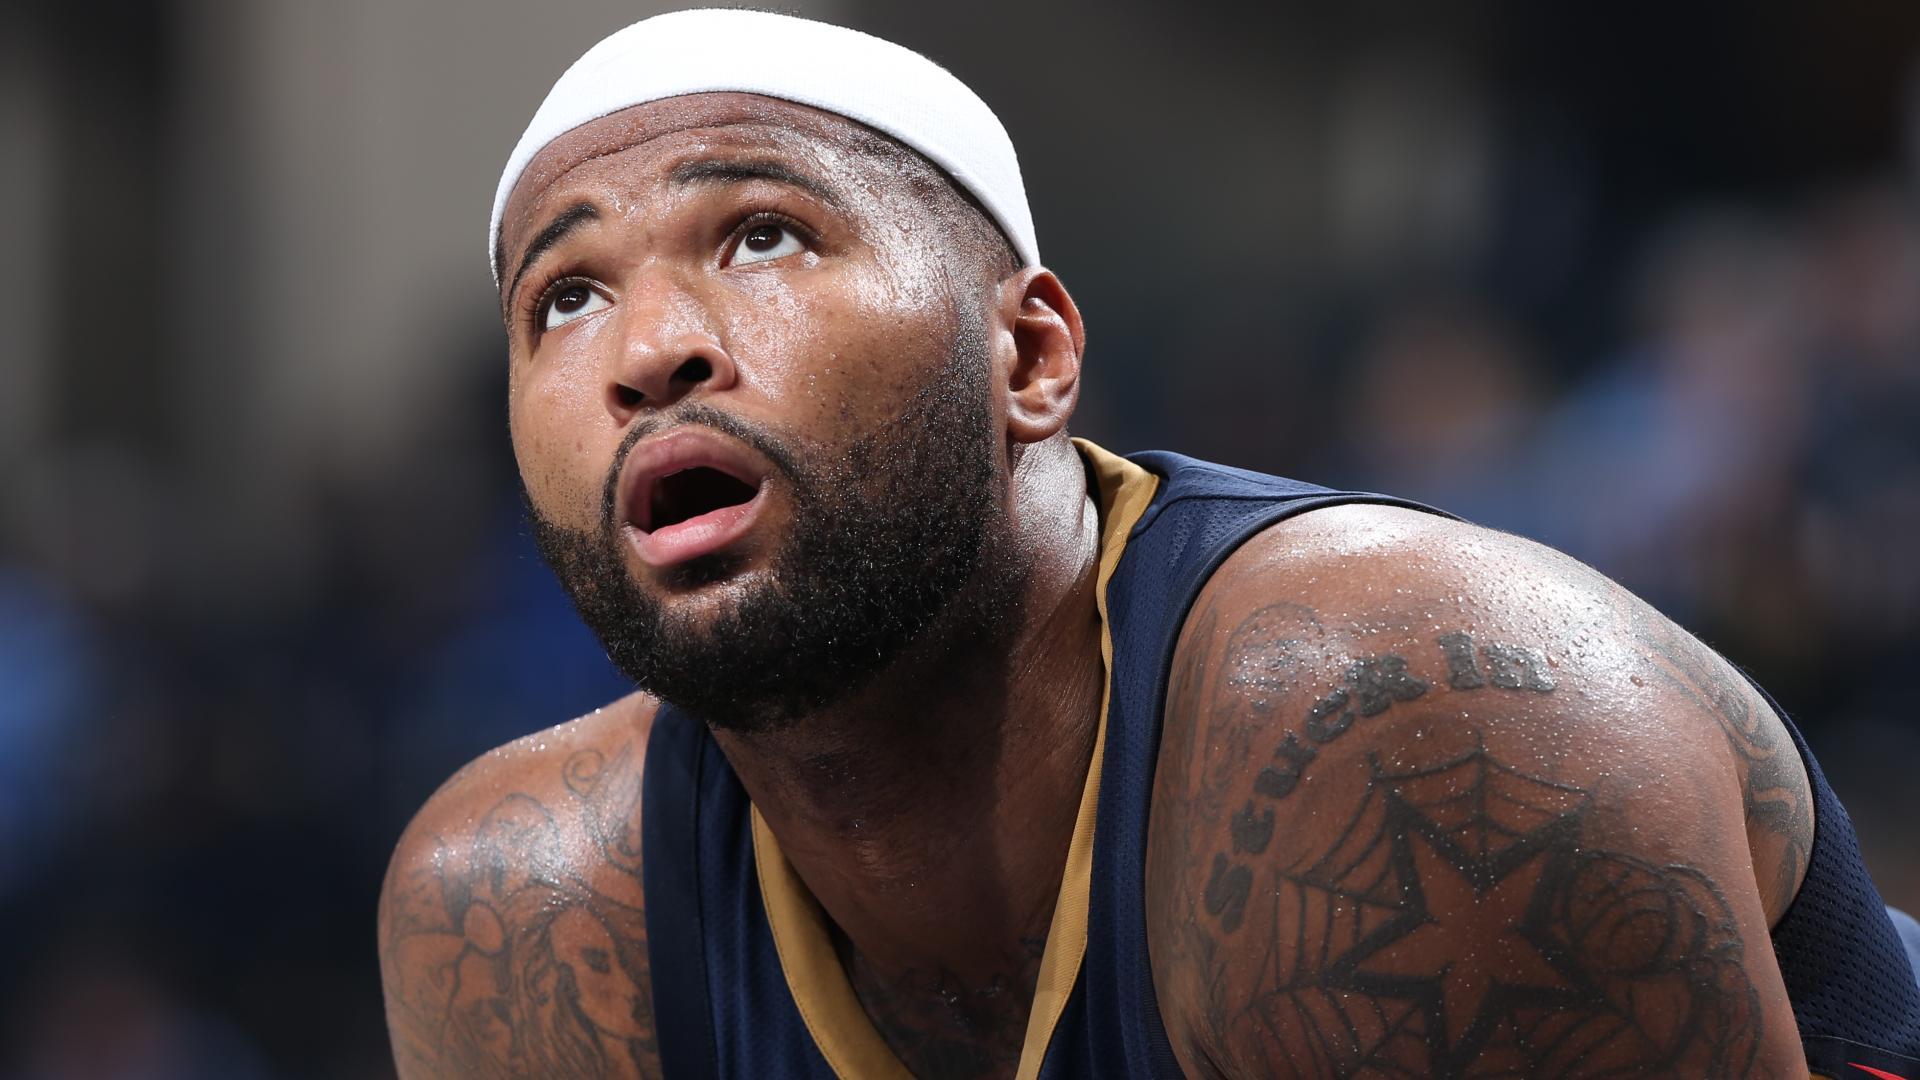 Reports: DeMarcus Cousins joining Golden State Warriors